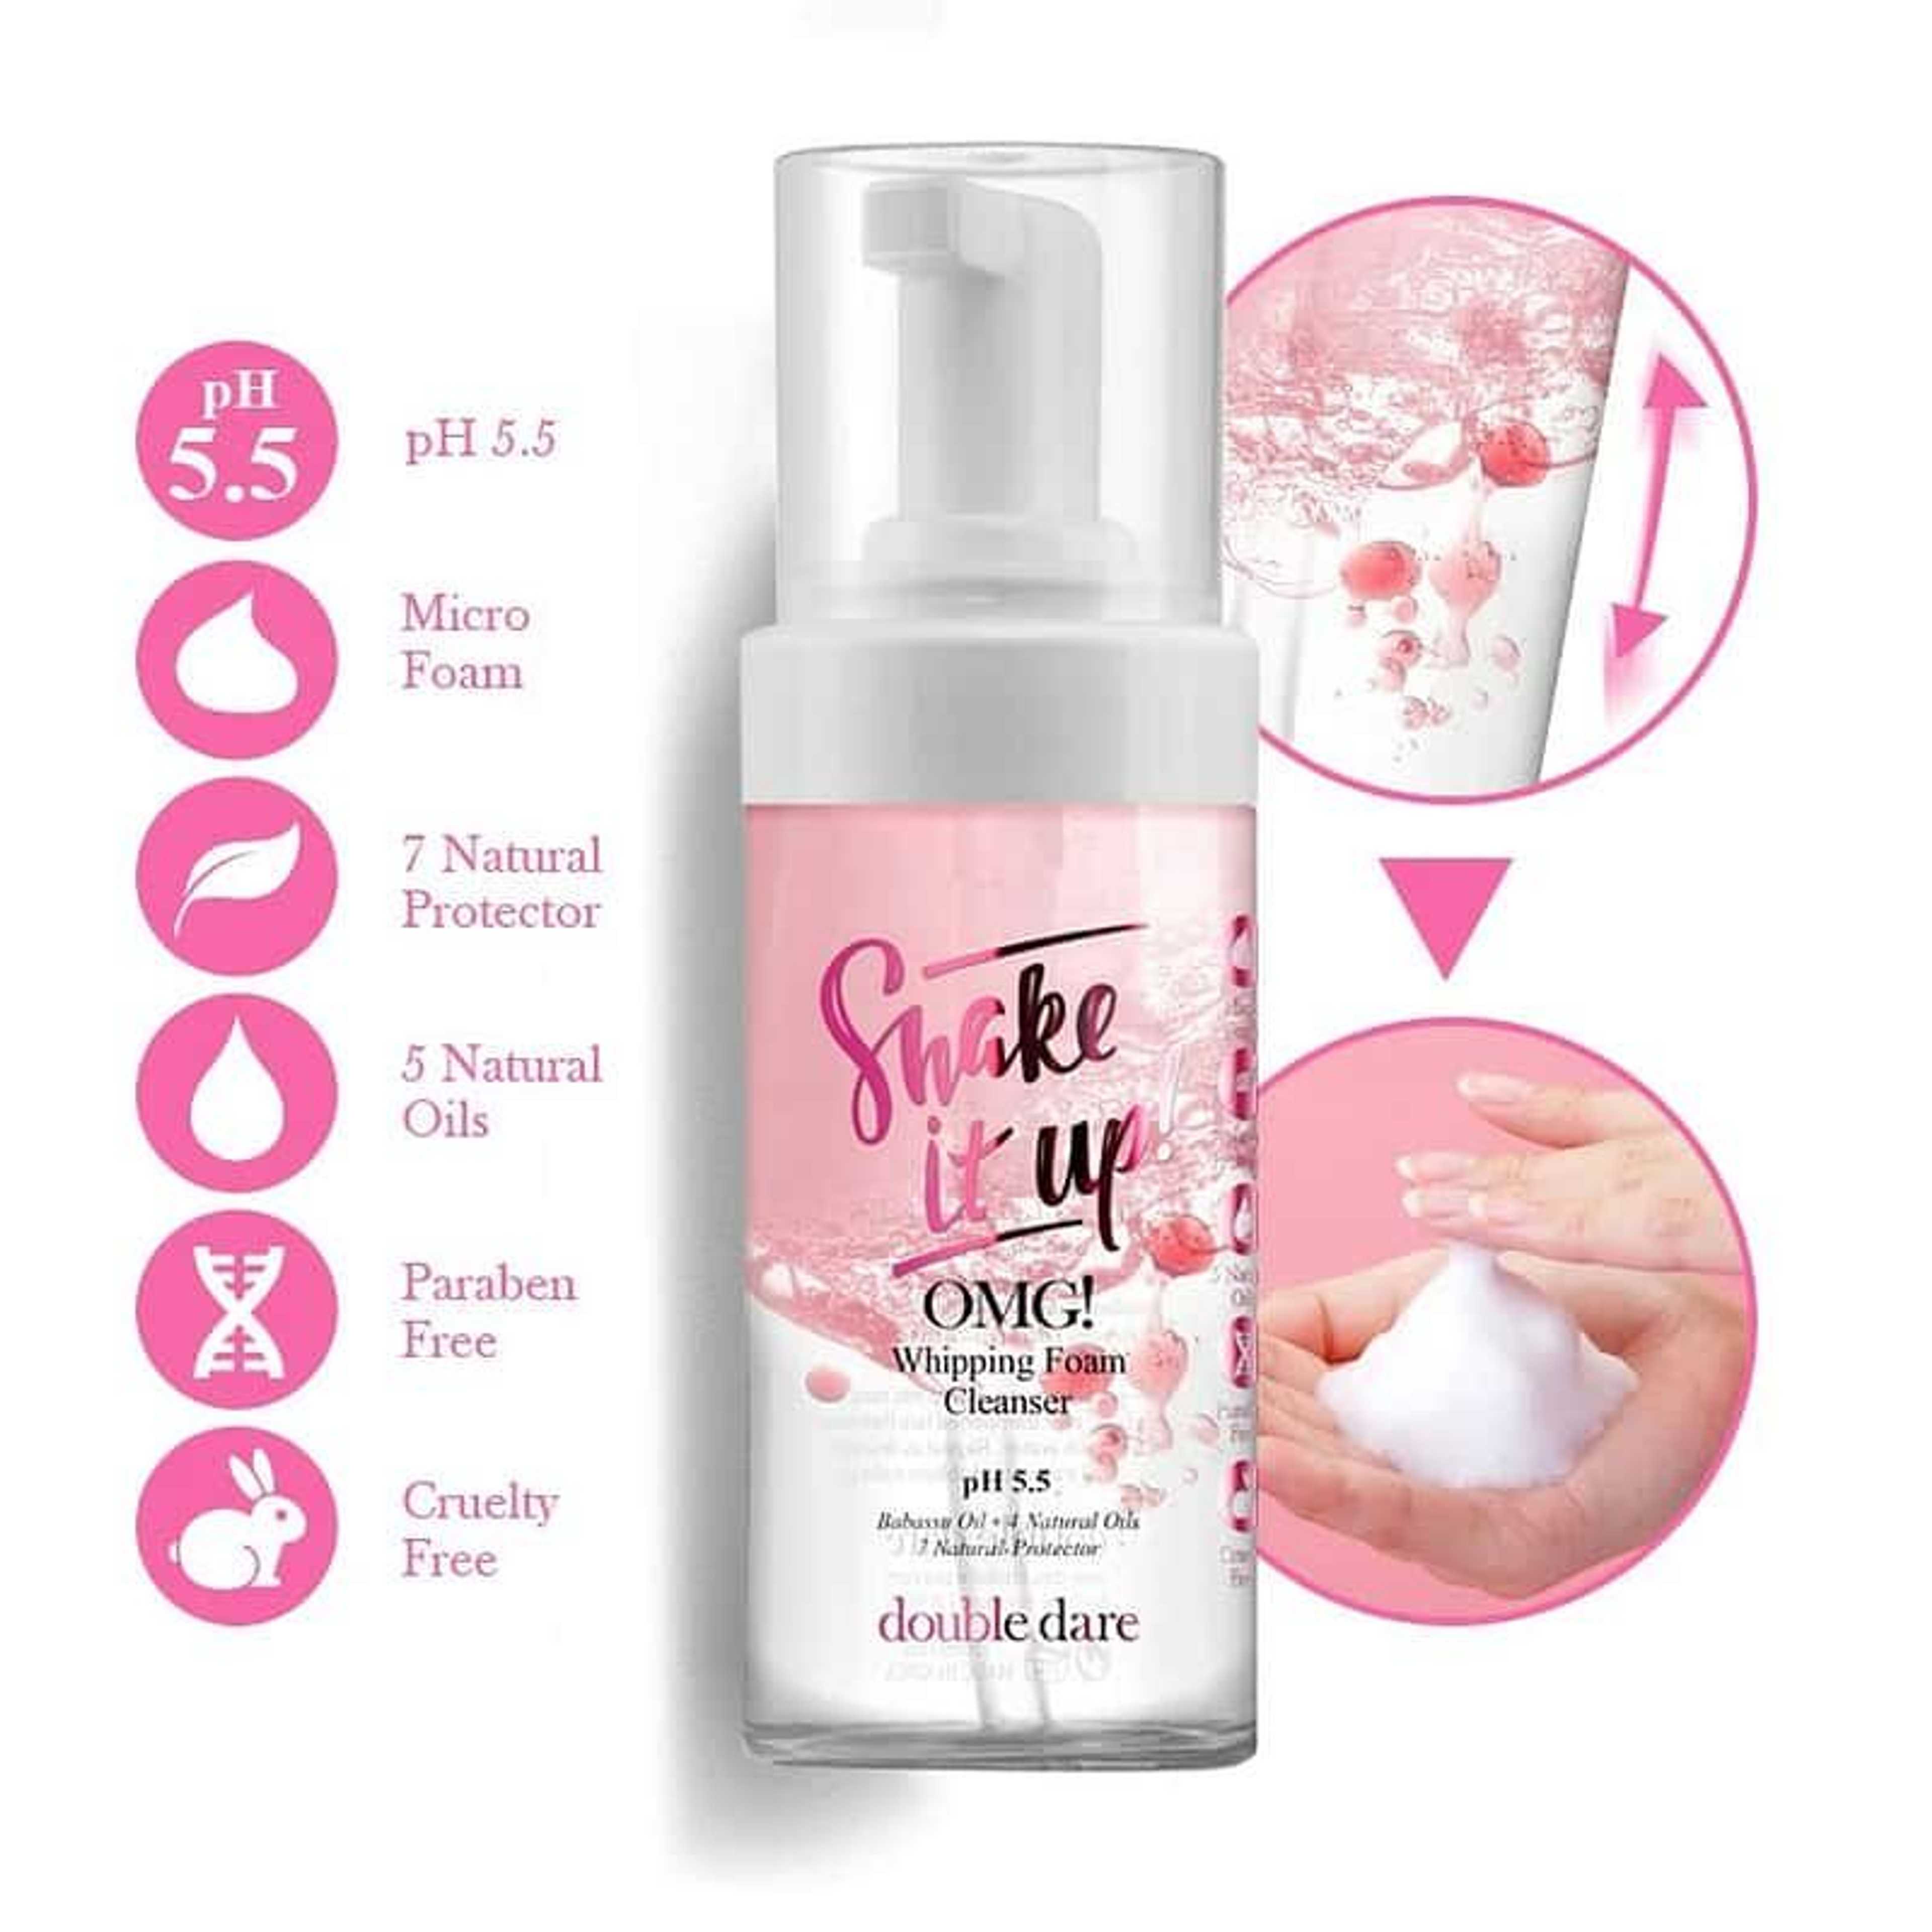 SHAKE IT UP! OMG! WHIPPING FOAM CLEANSER